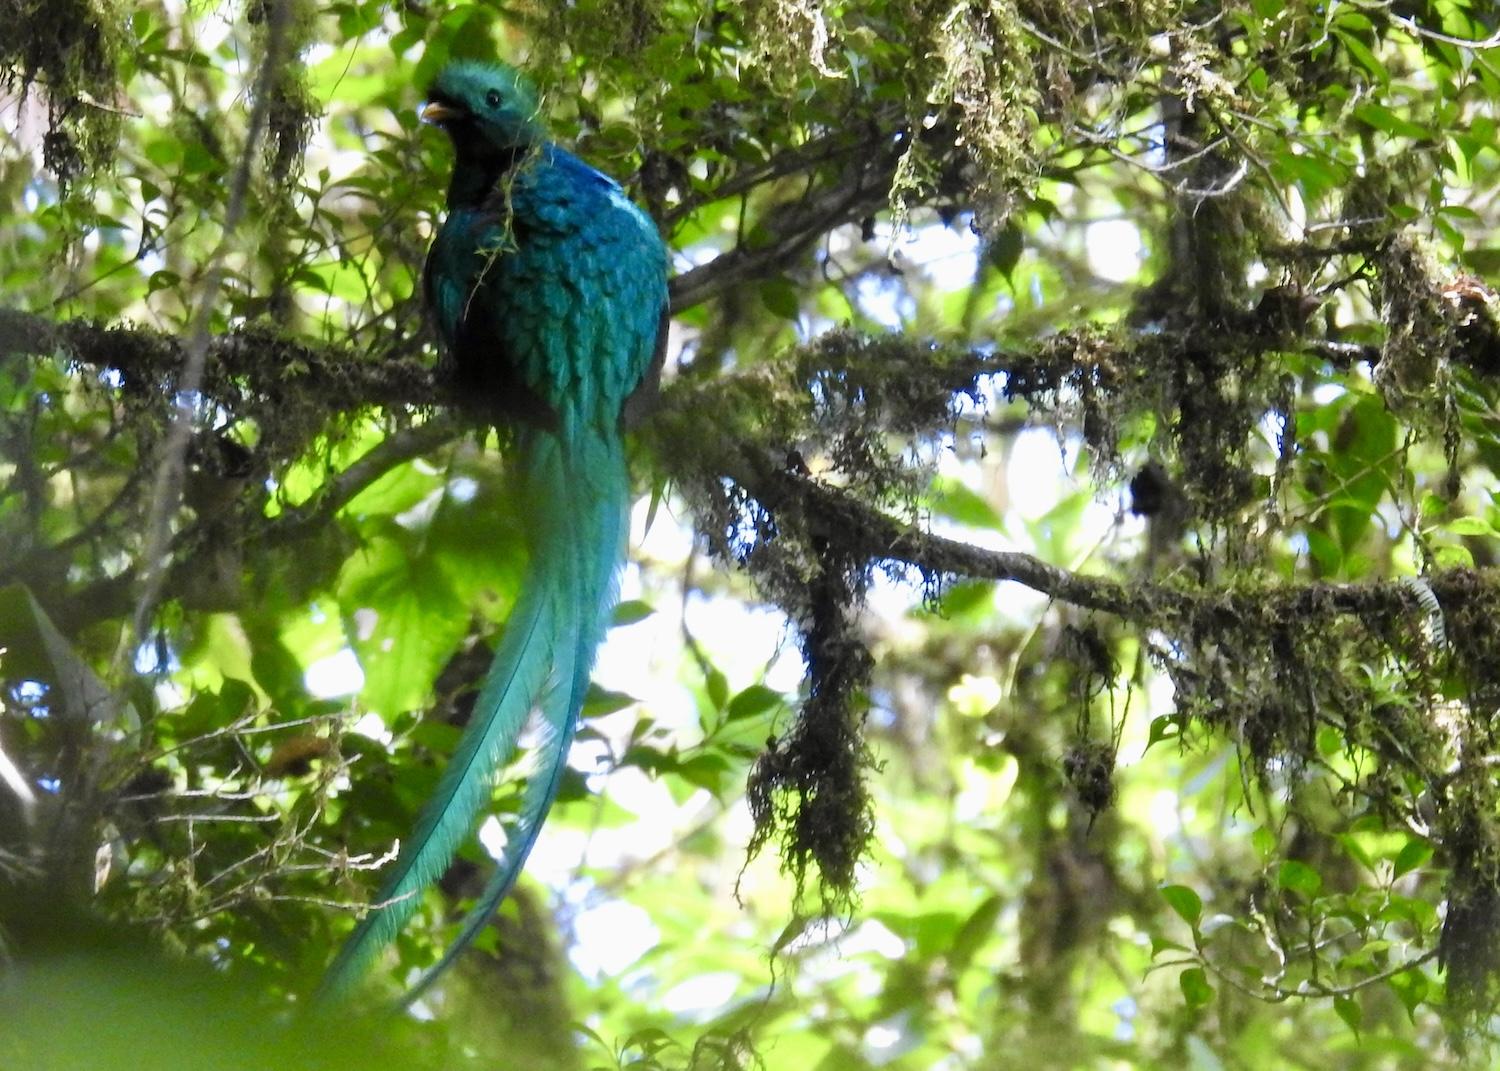 A Resplendent quetzal hides in the trees in Selvatura Park in Costa Rica.